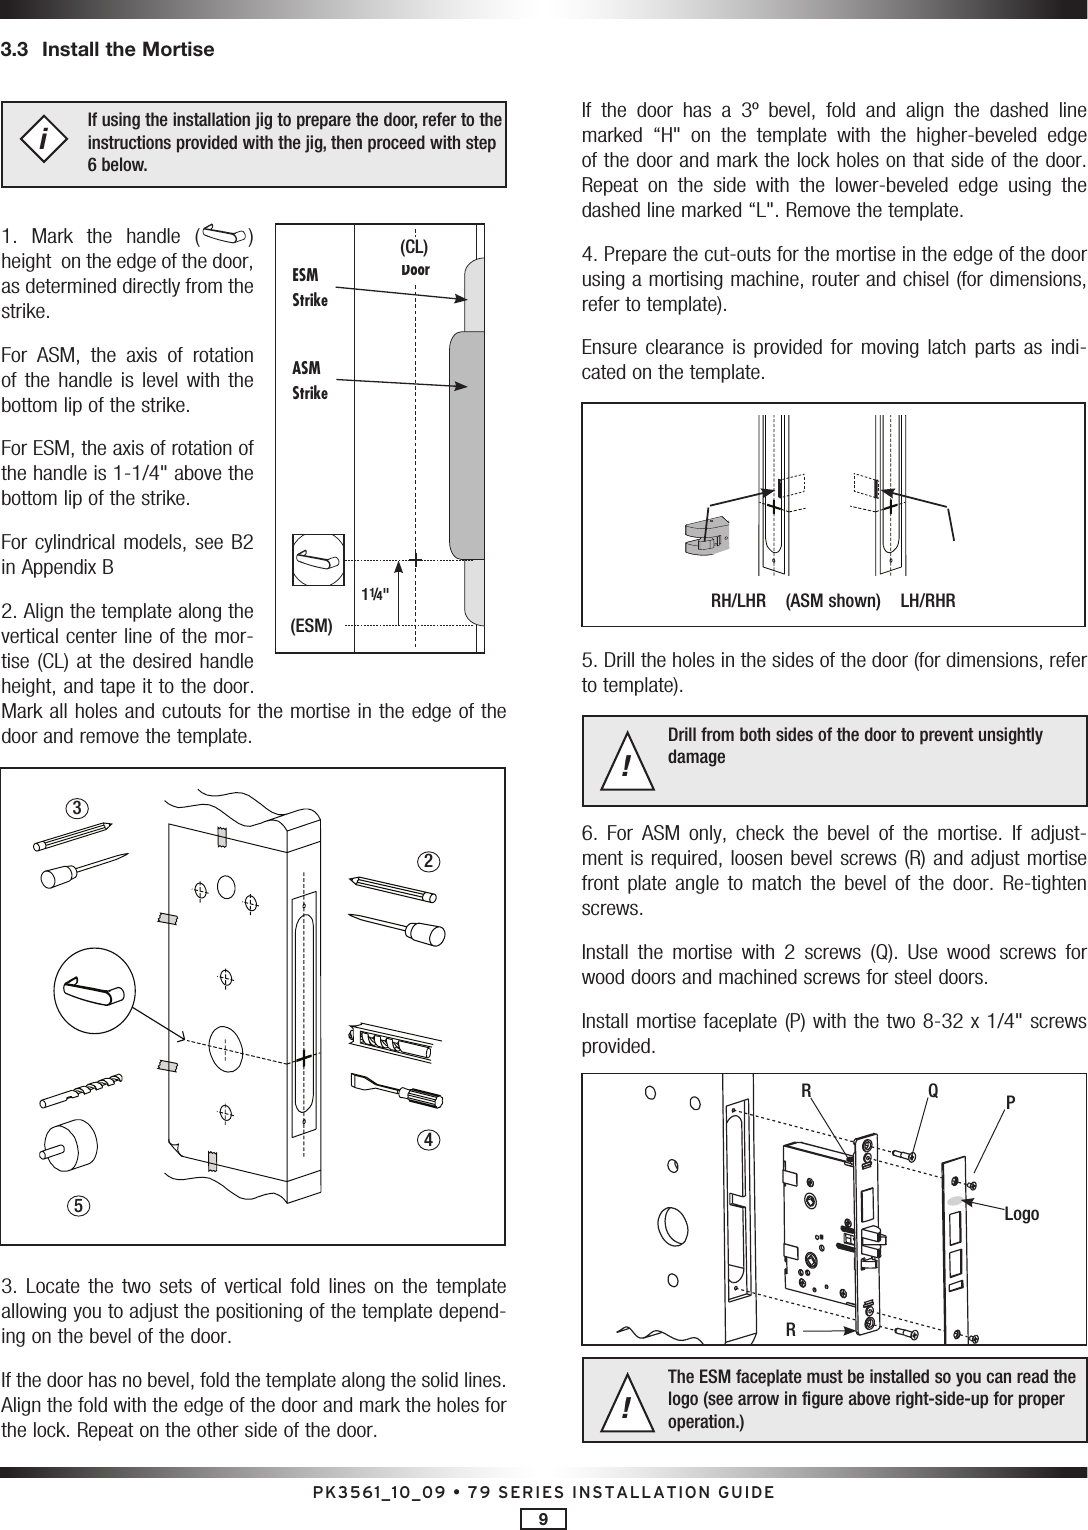 PK3561_10_09 • 79 SERIES INSTALLATION GUIDE9If using the installation jig to prepare the door, refer to the instructions provided with the jig, then proceed with step 6 below.i1.  Mark  the  handle  ( ) height  on the edge of the door, as determined directly from the strike. For  ASM,  the  axis  of  rotation of  the  handle  is level  with  the bottom lip of the strike.For ESM, the axis of rotation of the handle is 1-1/4&quot; above the bottom lip of the strike.For cylindrical models, see B2 in Appendix B2. Align the template along the vertical center line of the mor-tise (CL) at the desired  handle height, and tape it to the door. Mark all holes and cutouts for the mortise in the edge of the door and remove the template.3.  Locate  the  two  sets  of  vertical  fold  lines  on  the  template allowing you to adjust the positioning of the template depend-ing on the bevel of the door.If the door has no bevel, fold the template along the solid lines. Align the fold with the edge of the door and mark the holes for the lock. Repeat on the other side of the door.If  the  door  has  a  3º  bevel,  fold  and  align  the  dashed  line marked  “H&quot;  on  the  template  with  the  higher-beveled  edge of the door and mark the lock holes on that side of the door. Repeat  on  the  side  with  the  lower-beveled  edge  using  the dashed line marked “L&quot;. Remove the template.4. Prepare the cut-outs for the mortise in the edge of the door using a mortising machine, router and chisel (for dimensions, refer to template). Ensure  clearance  is  provided  for  moving  latch  parts  as  indi-cated on the template.5. Drill the holes in the sides of the door (for dimensions, refer to template).Drill from both sides of the door to prevent unsightly damage!6.  For  ASM  only,  check  the  bevel  of  the  mortise.  If  adjust-ment is required, loosen bevel screws (R) and adjust mortise front  plate  angle  to  match  the  bevel  of  the  door.  Re-tighten screws.Install  the  mortise  with  2  screws  (Q).  Use  wood  screws  for wood doors and machined screws for steel doors.Install mortise faceplate (P) with the two 8-32 x 1/4&quot; screws provided. The ESM faceplate must be installed so you can read the logo (see arrow in figure above right-side-up for proper operation.)!3.3  Install the MortiseESM Strike(ESM)ASM Strike11/4&quot;Door(CL)2543RH/LHR    (ASM shown)    LH/RHRLogoPQRR